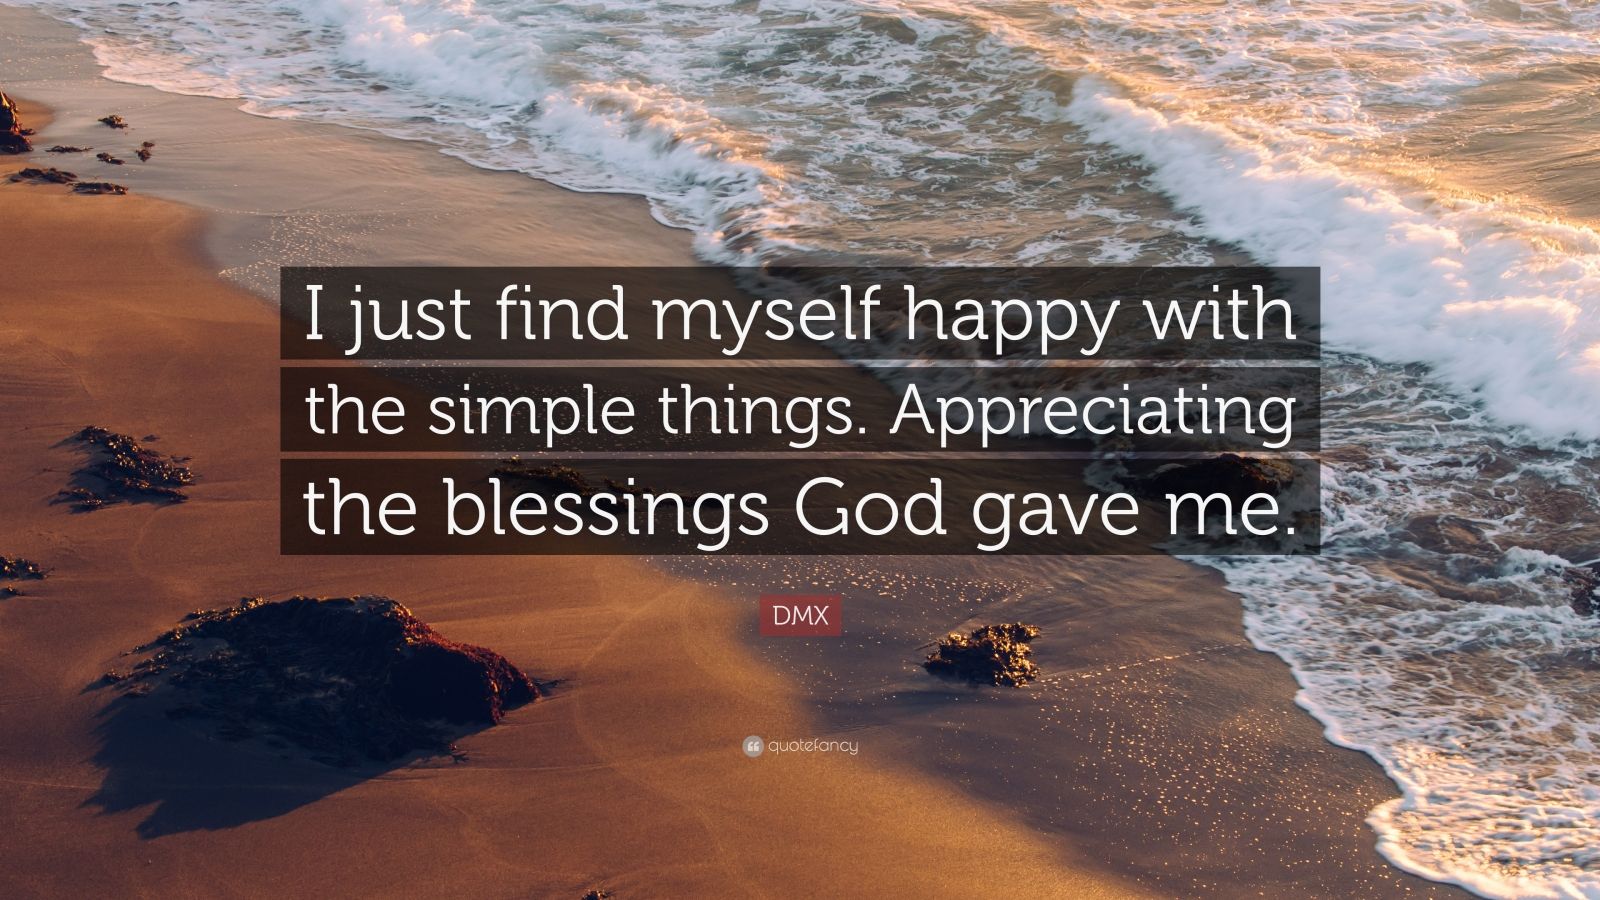 DMX Quote: “I just find myself happy with the simple things ...